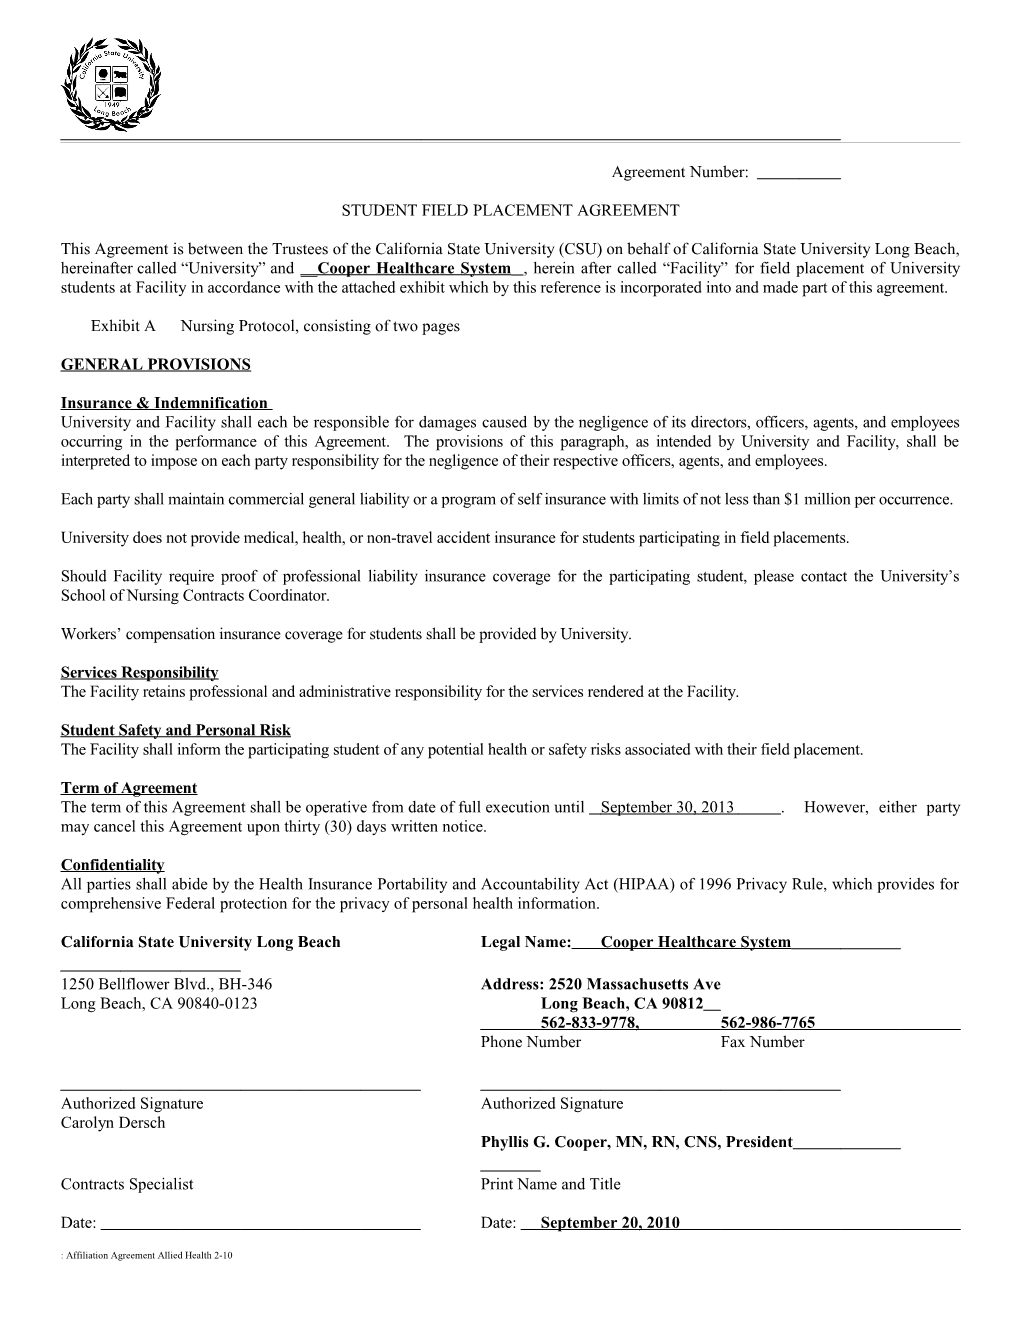 Student Field Placement Agreement